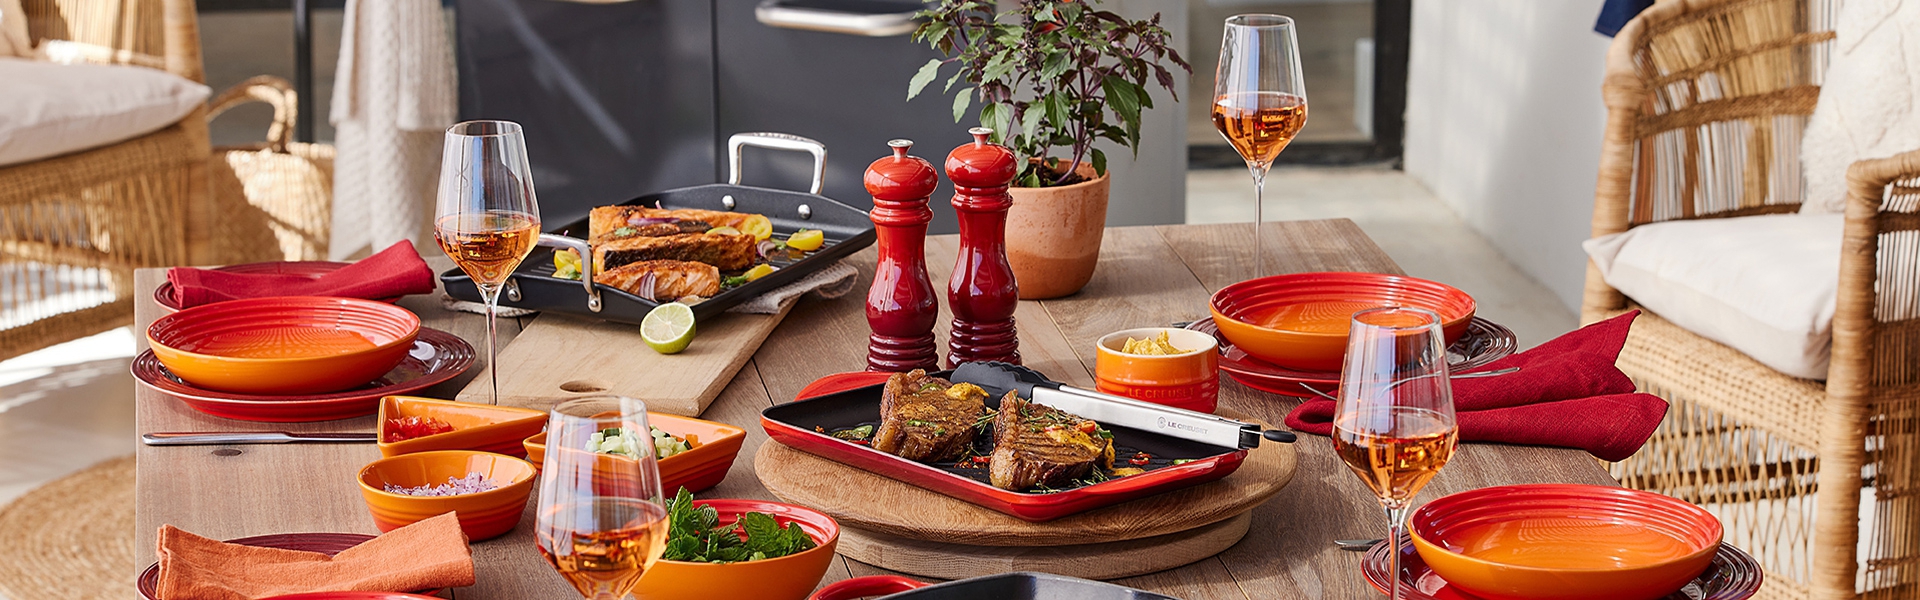 BBQ - Grilling with Le Creuset